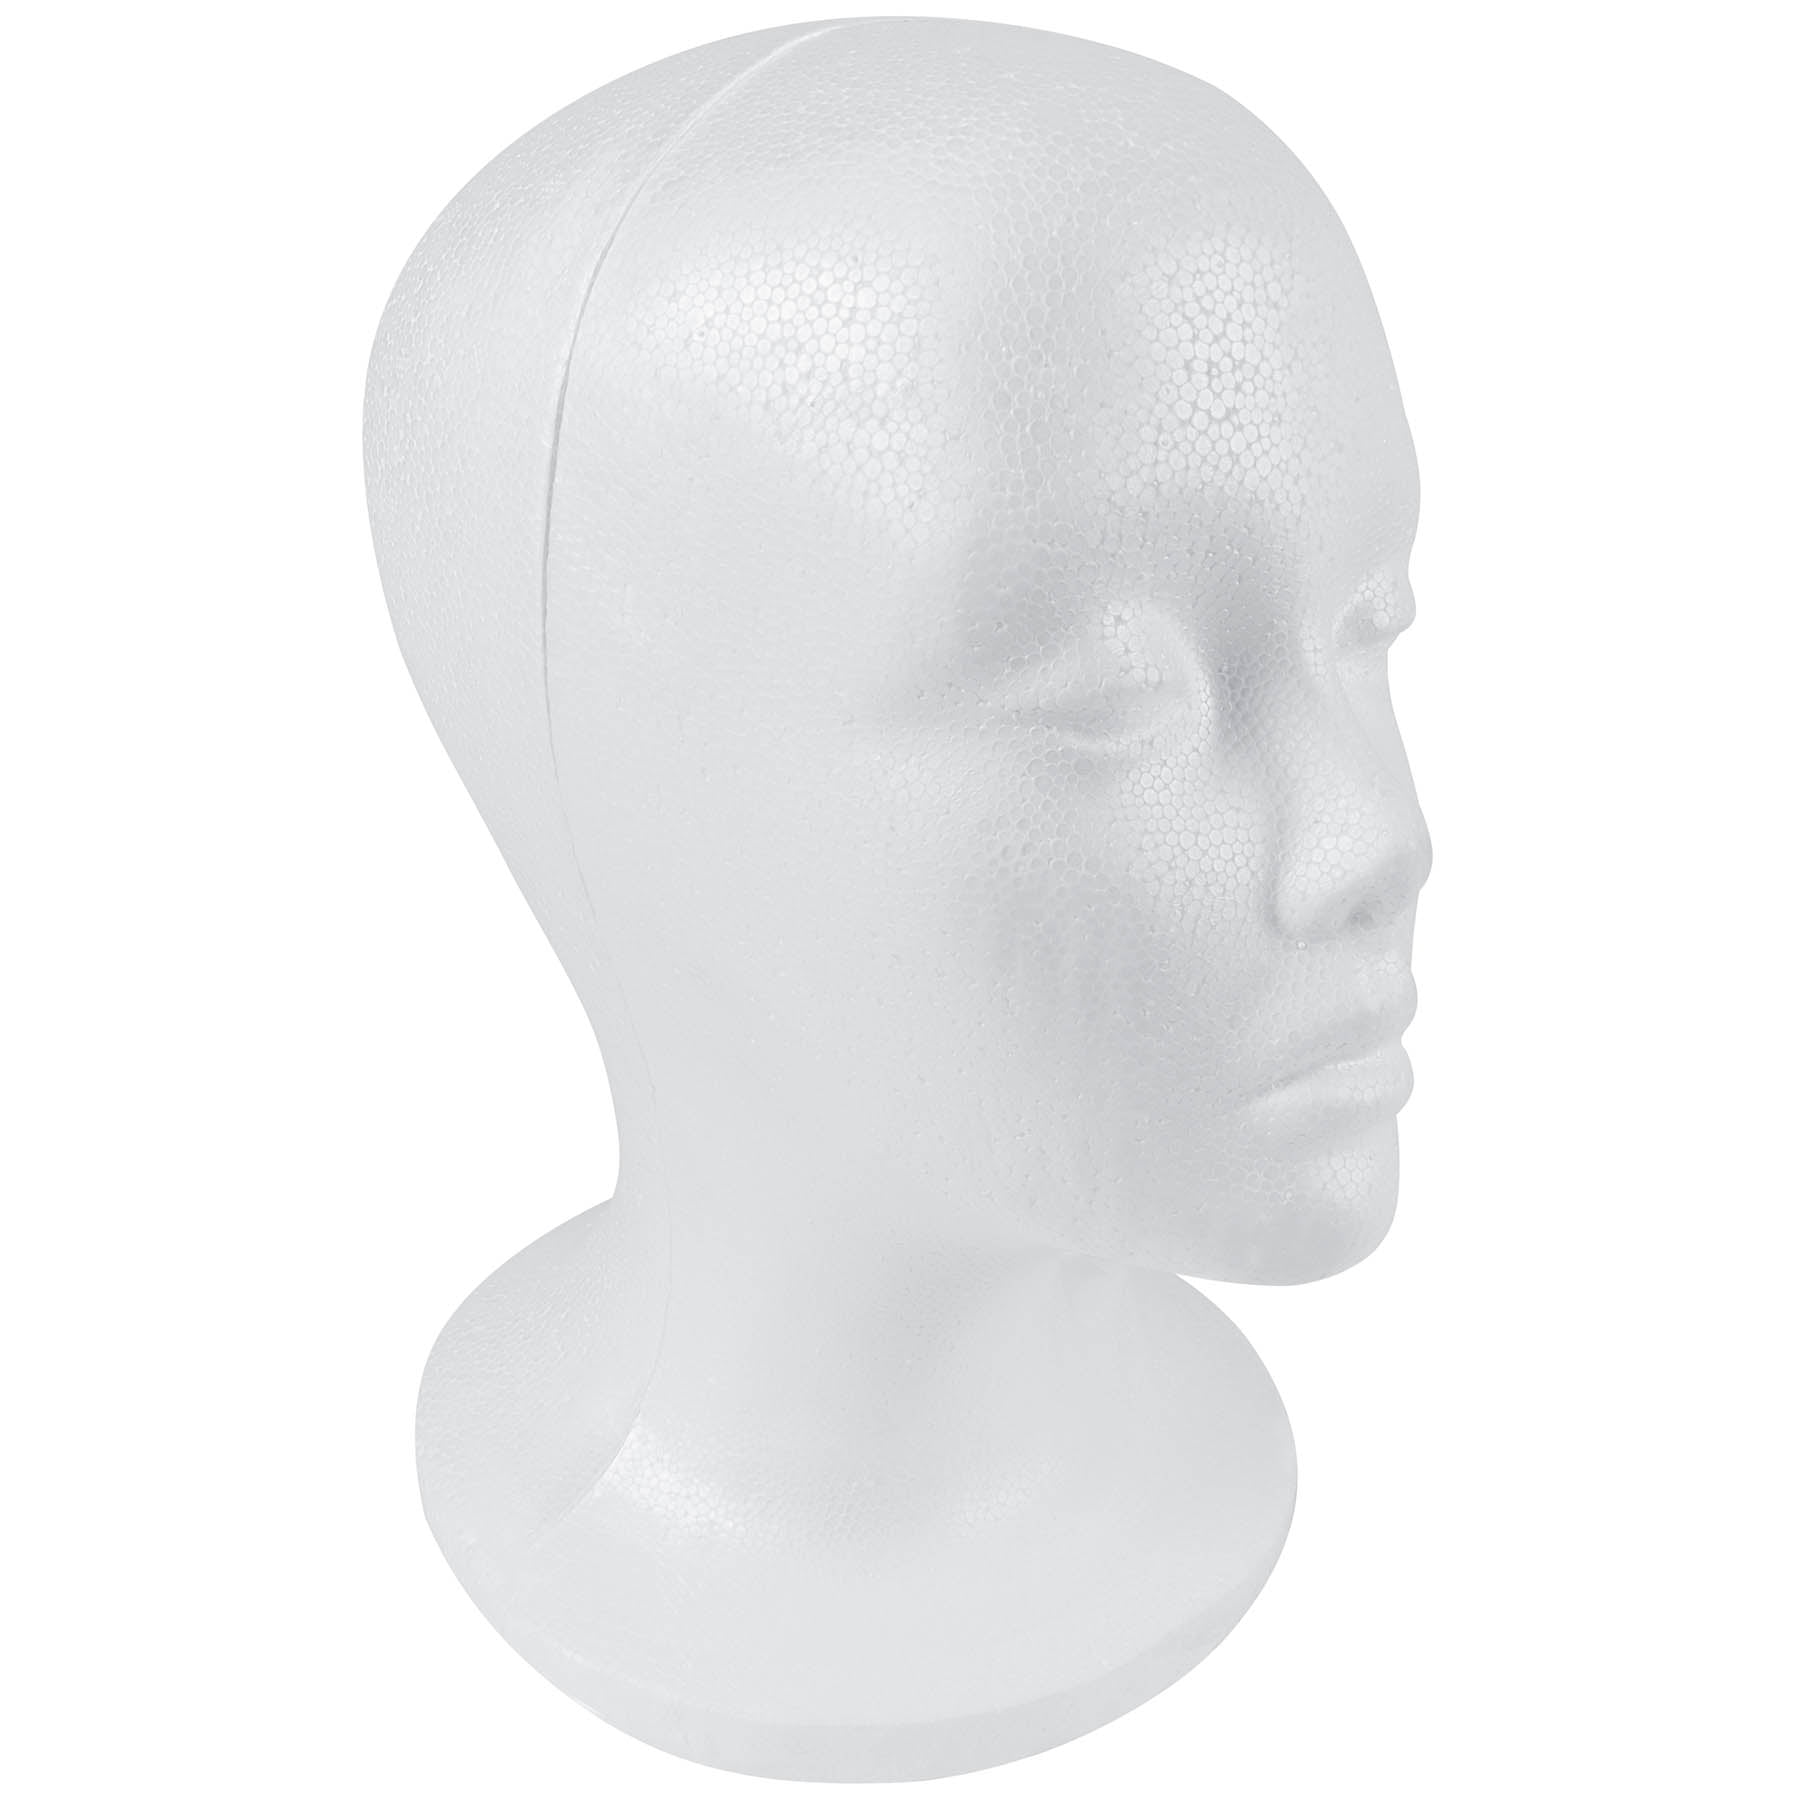 Blank White Unisex Head Styrofoam and Tabletop Center Support Mannequin Stand 